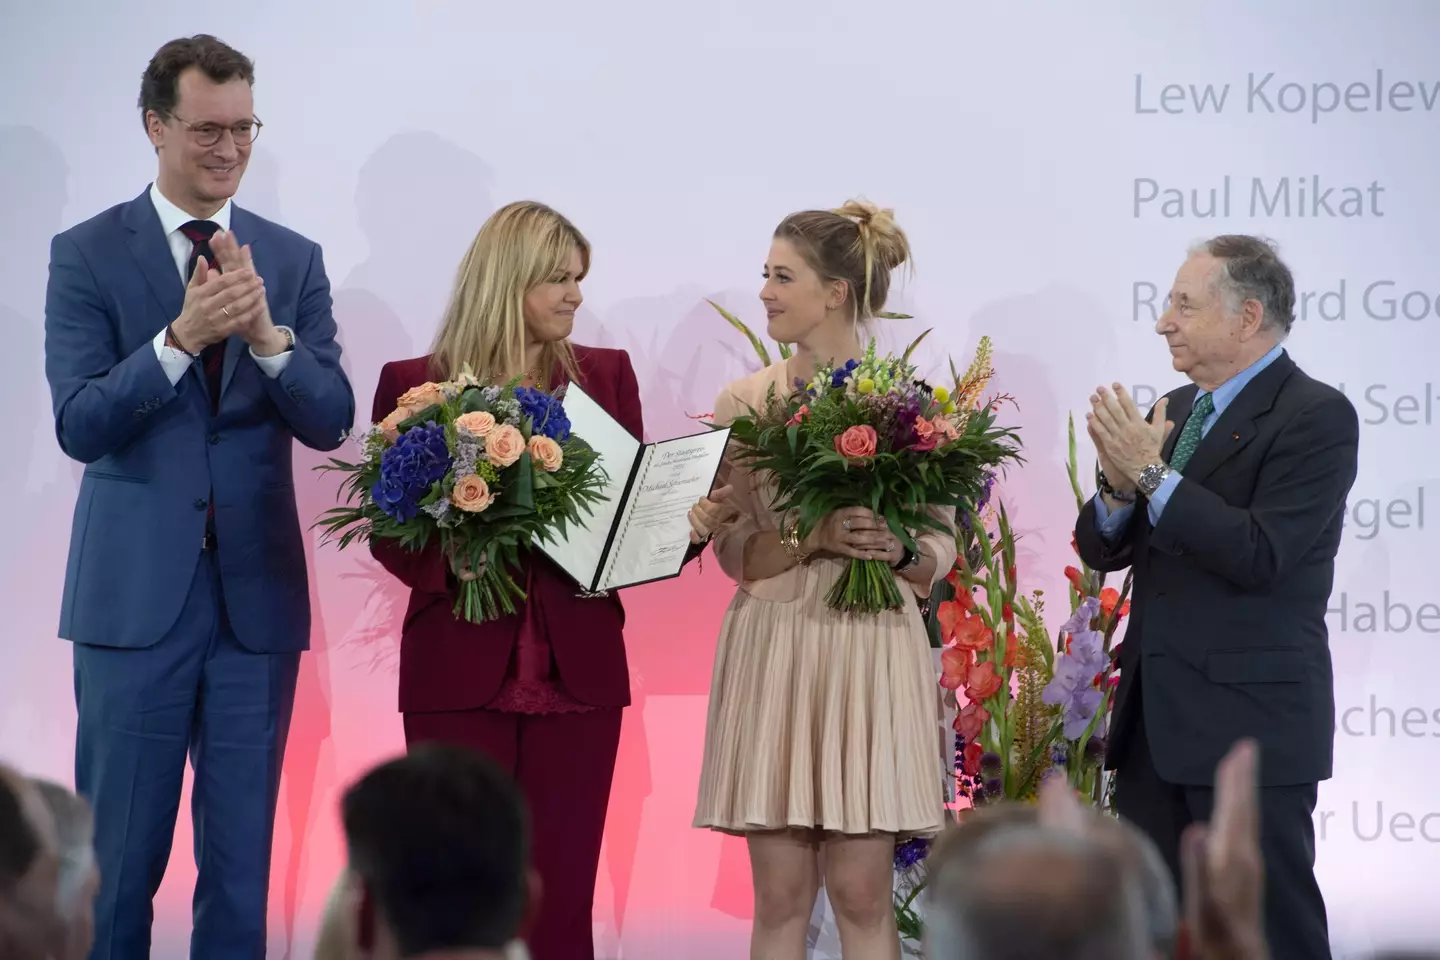 Todt appeared with Schumacher's family to accept an award on the legendary racing driver's behalf earlier this year.